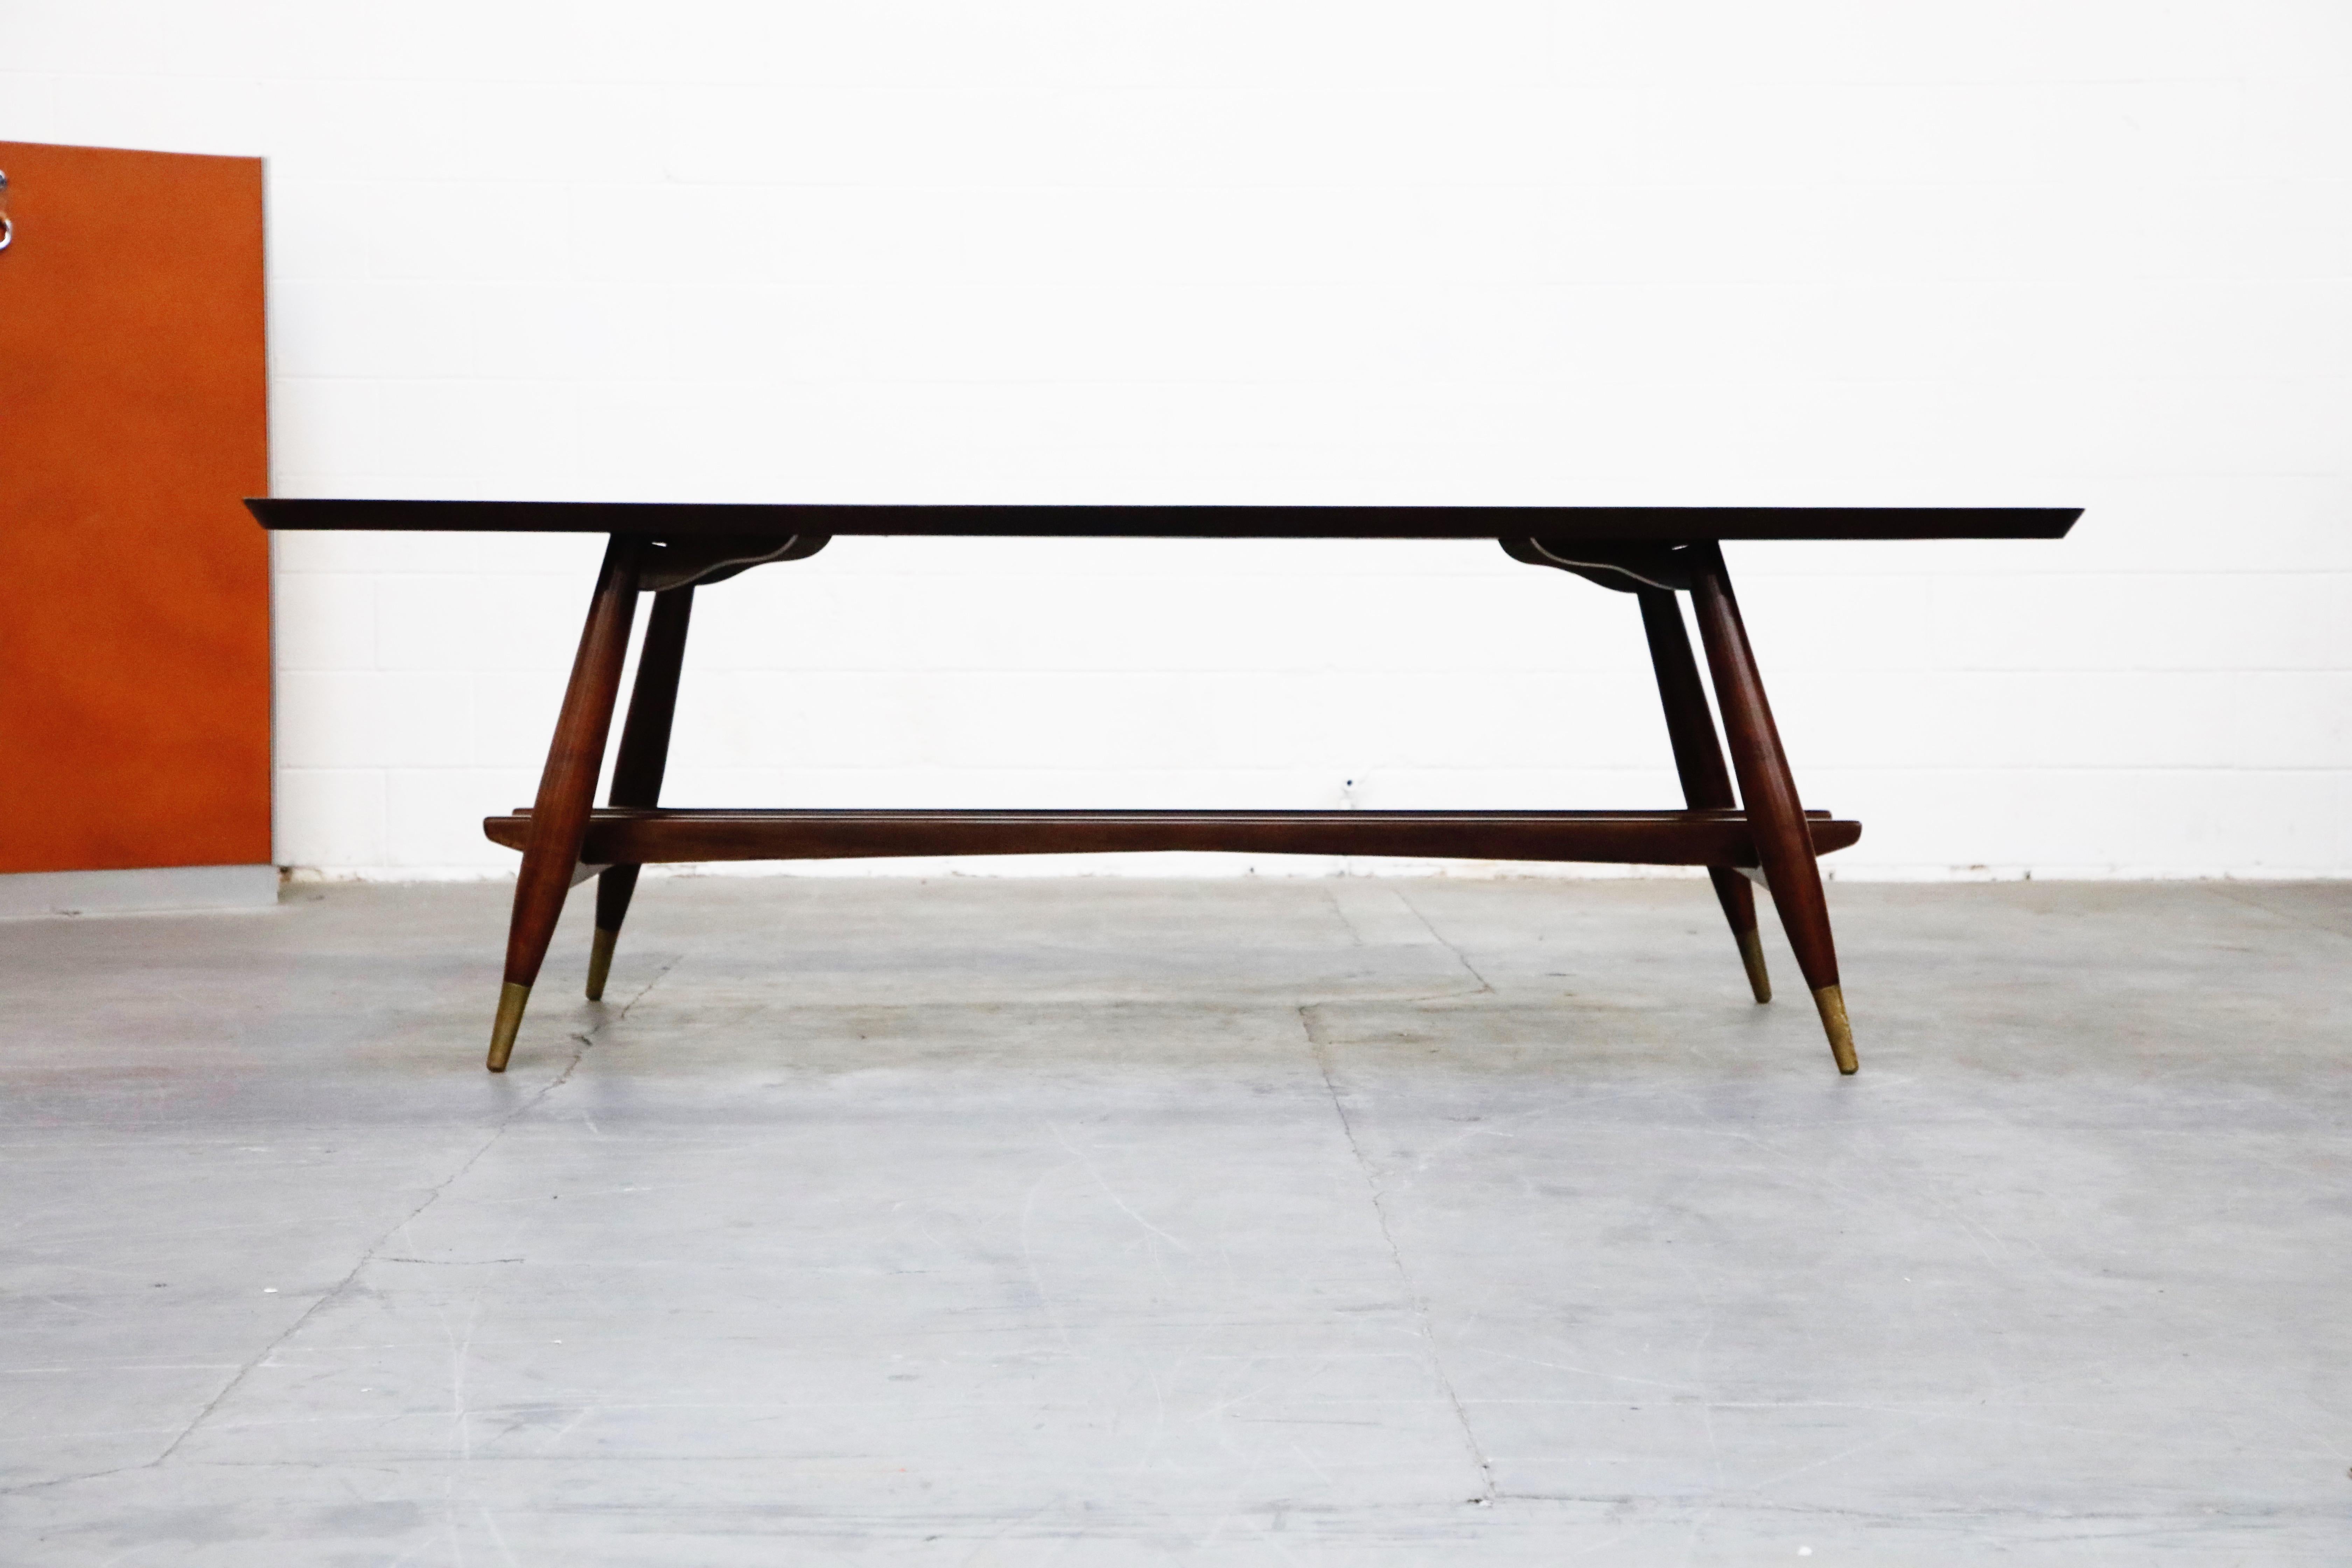 How do I love thee? Let me count the ways. This incredible Mahogany dining table by Mexican Modern designer Frank Kyle has so many incredible design elements that it truly checks every interior designer check box. 

Let's start with the double